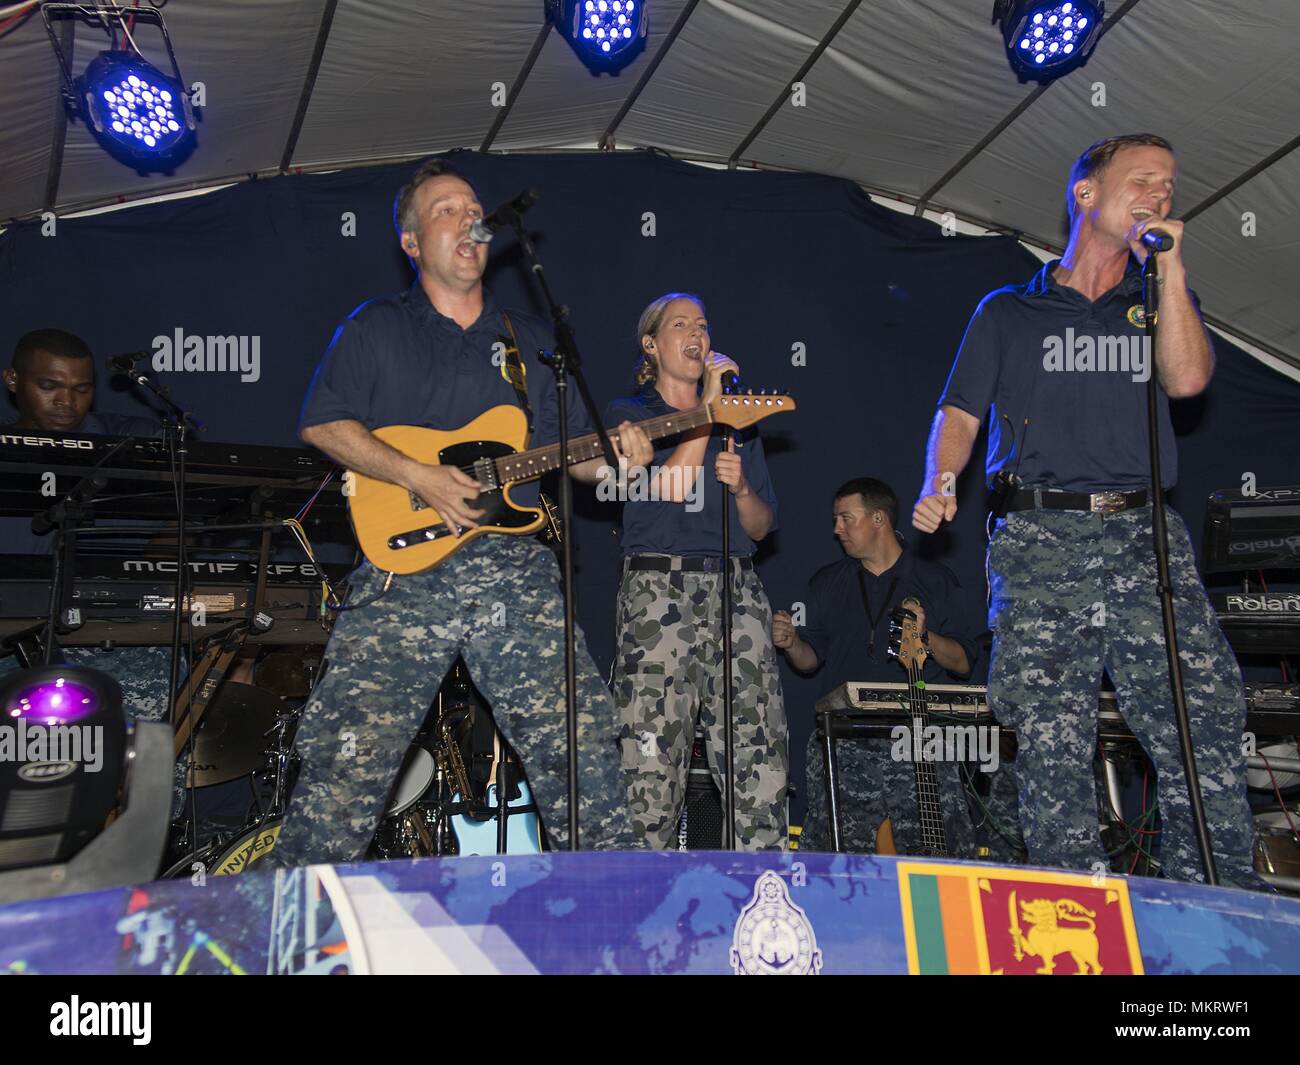 180506-N-FL910-0098 TRINCOMALEE, Sri Lanka (May 6, 2018) Service members assigned to the U.S. Pacific Fleet Band perform at Ehambaran Sport Ground in support of Pacific Partnership 2018 (PP18), May 6, 2018. PP18's mission is to work collectively with host and partner nations to enhance regional interoperability and disaster response capabilities, increase stability and security in the region, and foster new and enduring friendships across the Indo-Pacific Region. Pacific Partnership, now in its 13th iteration, is the largest annual multinational humanitarian assistance and disaster relief prep Stock Photo